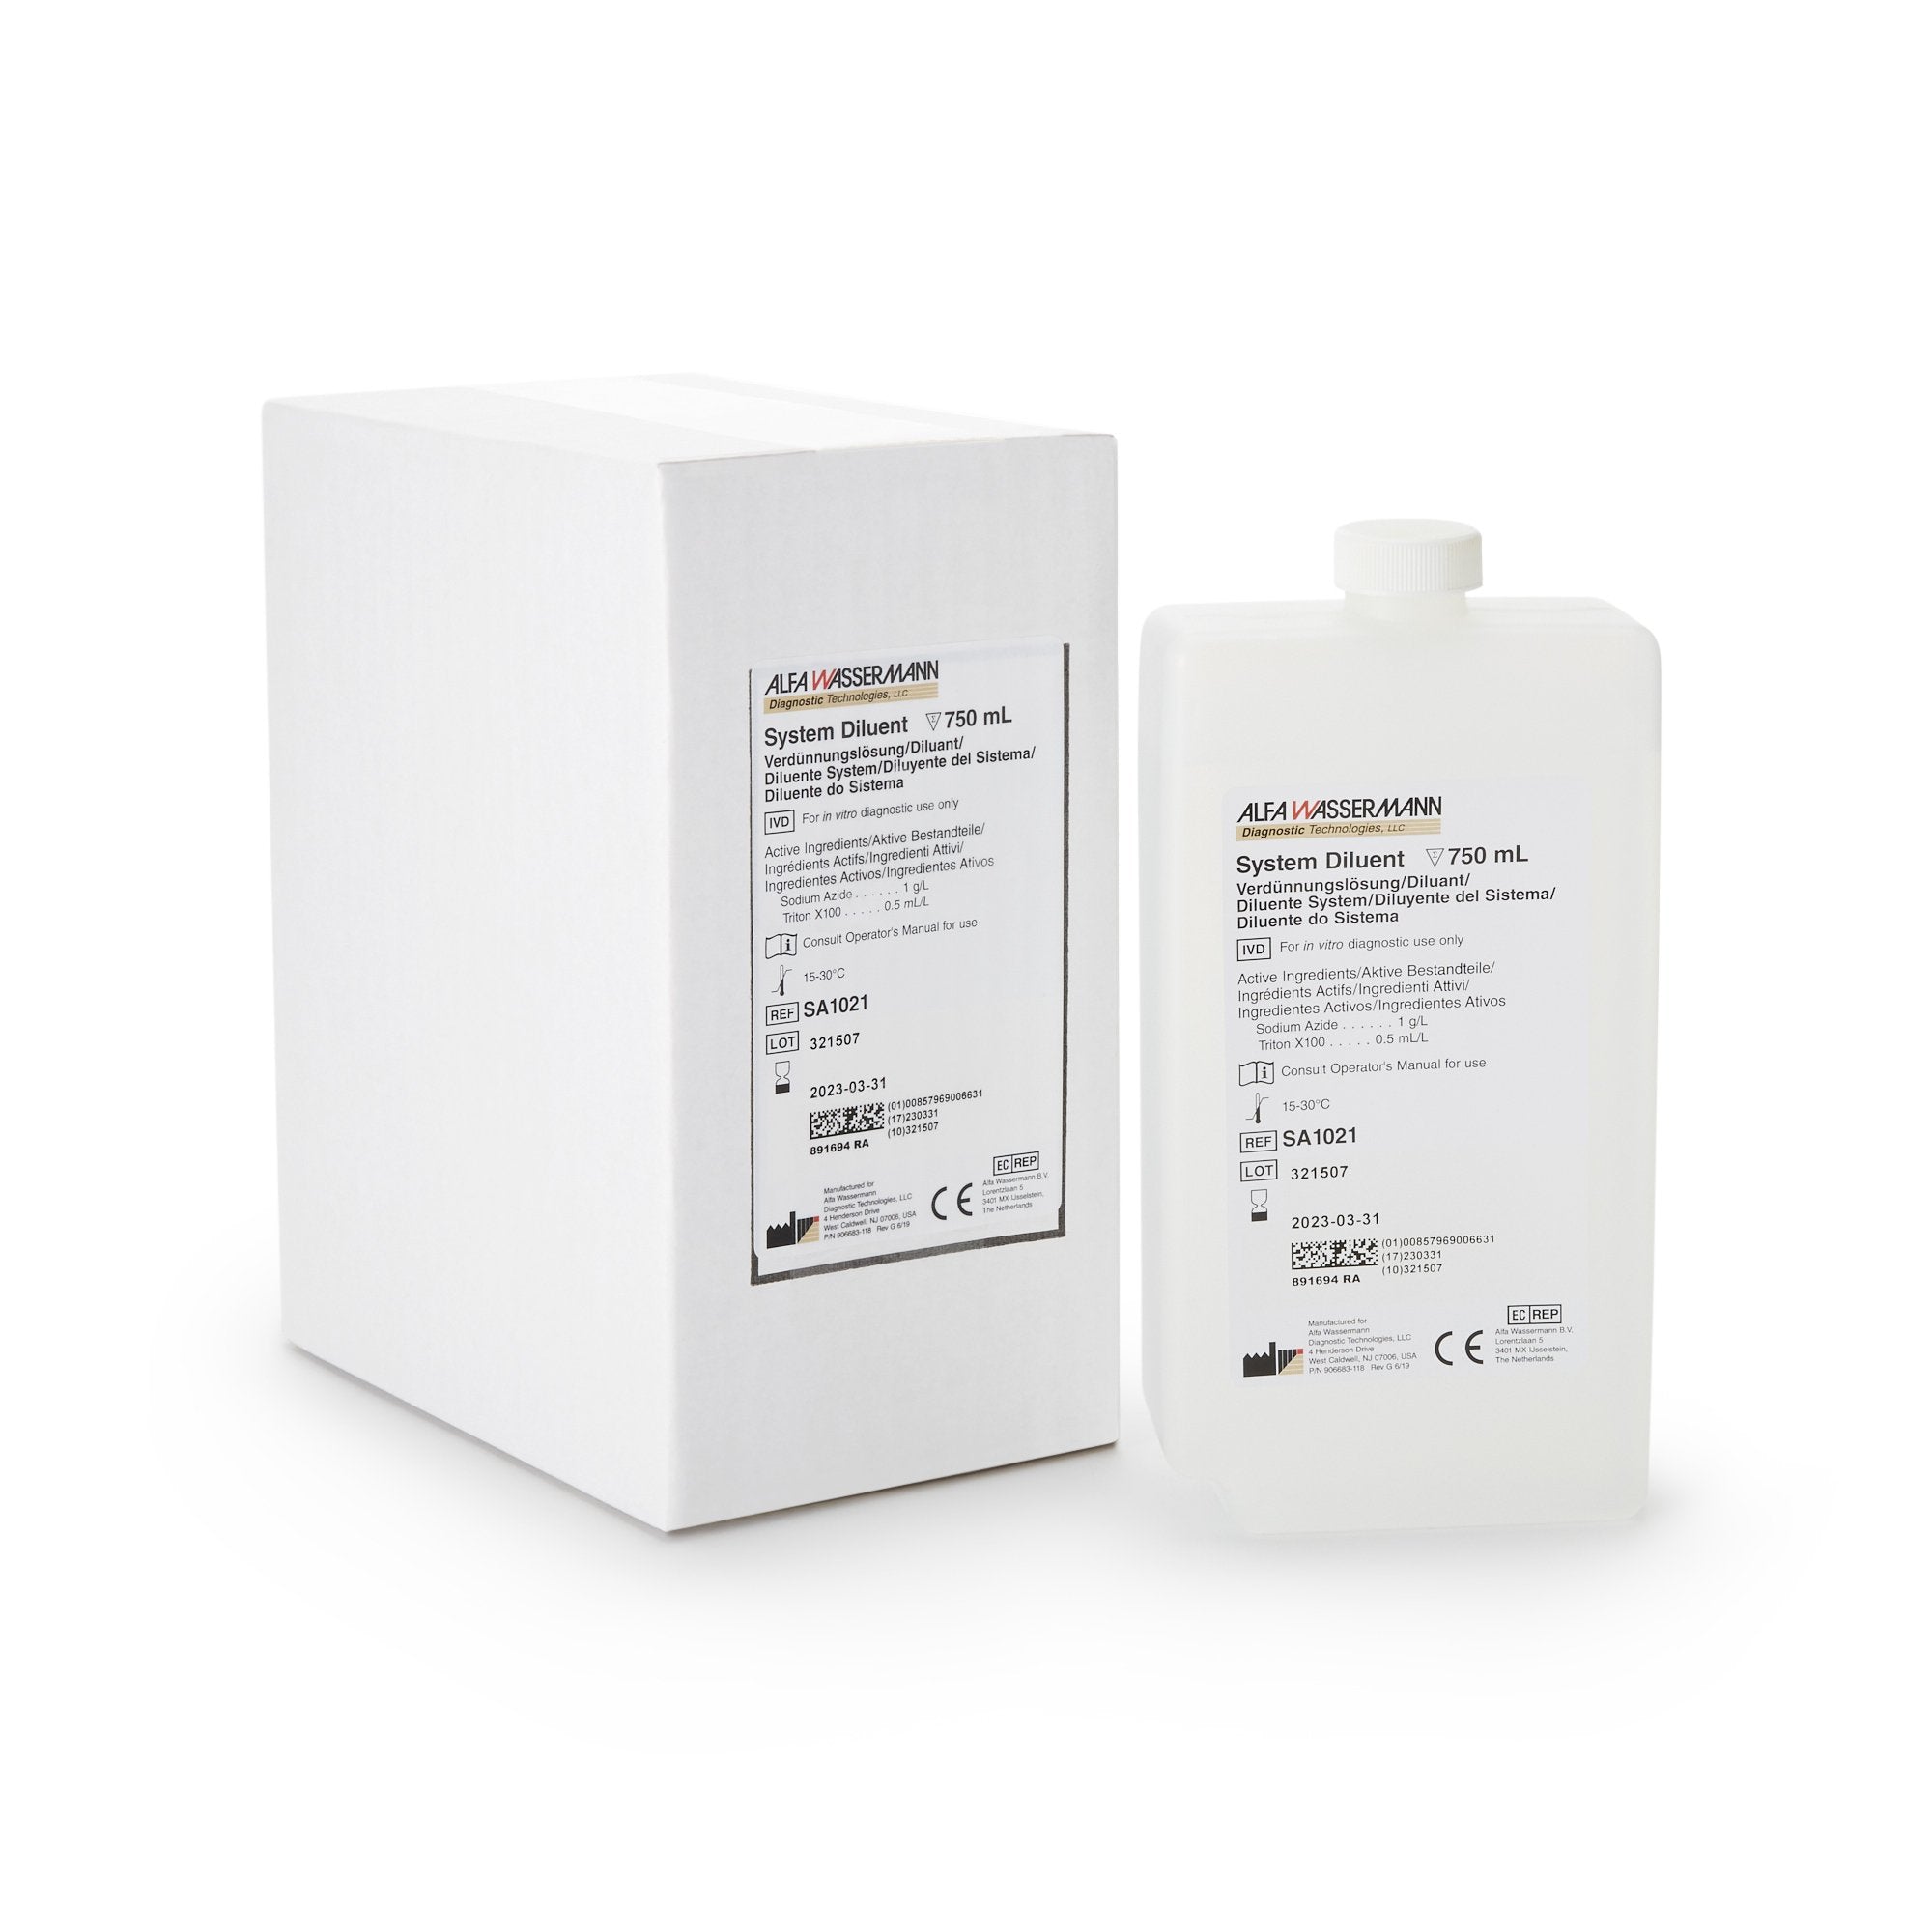 General Chemistry Reagent Diluent ACE® System Diluent